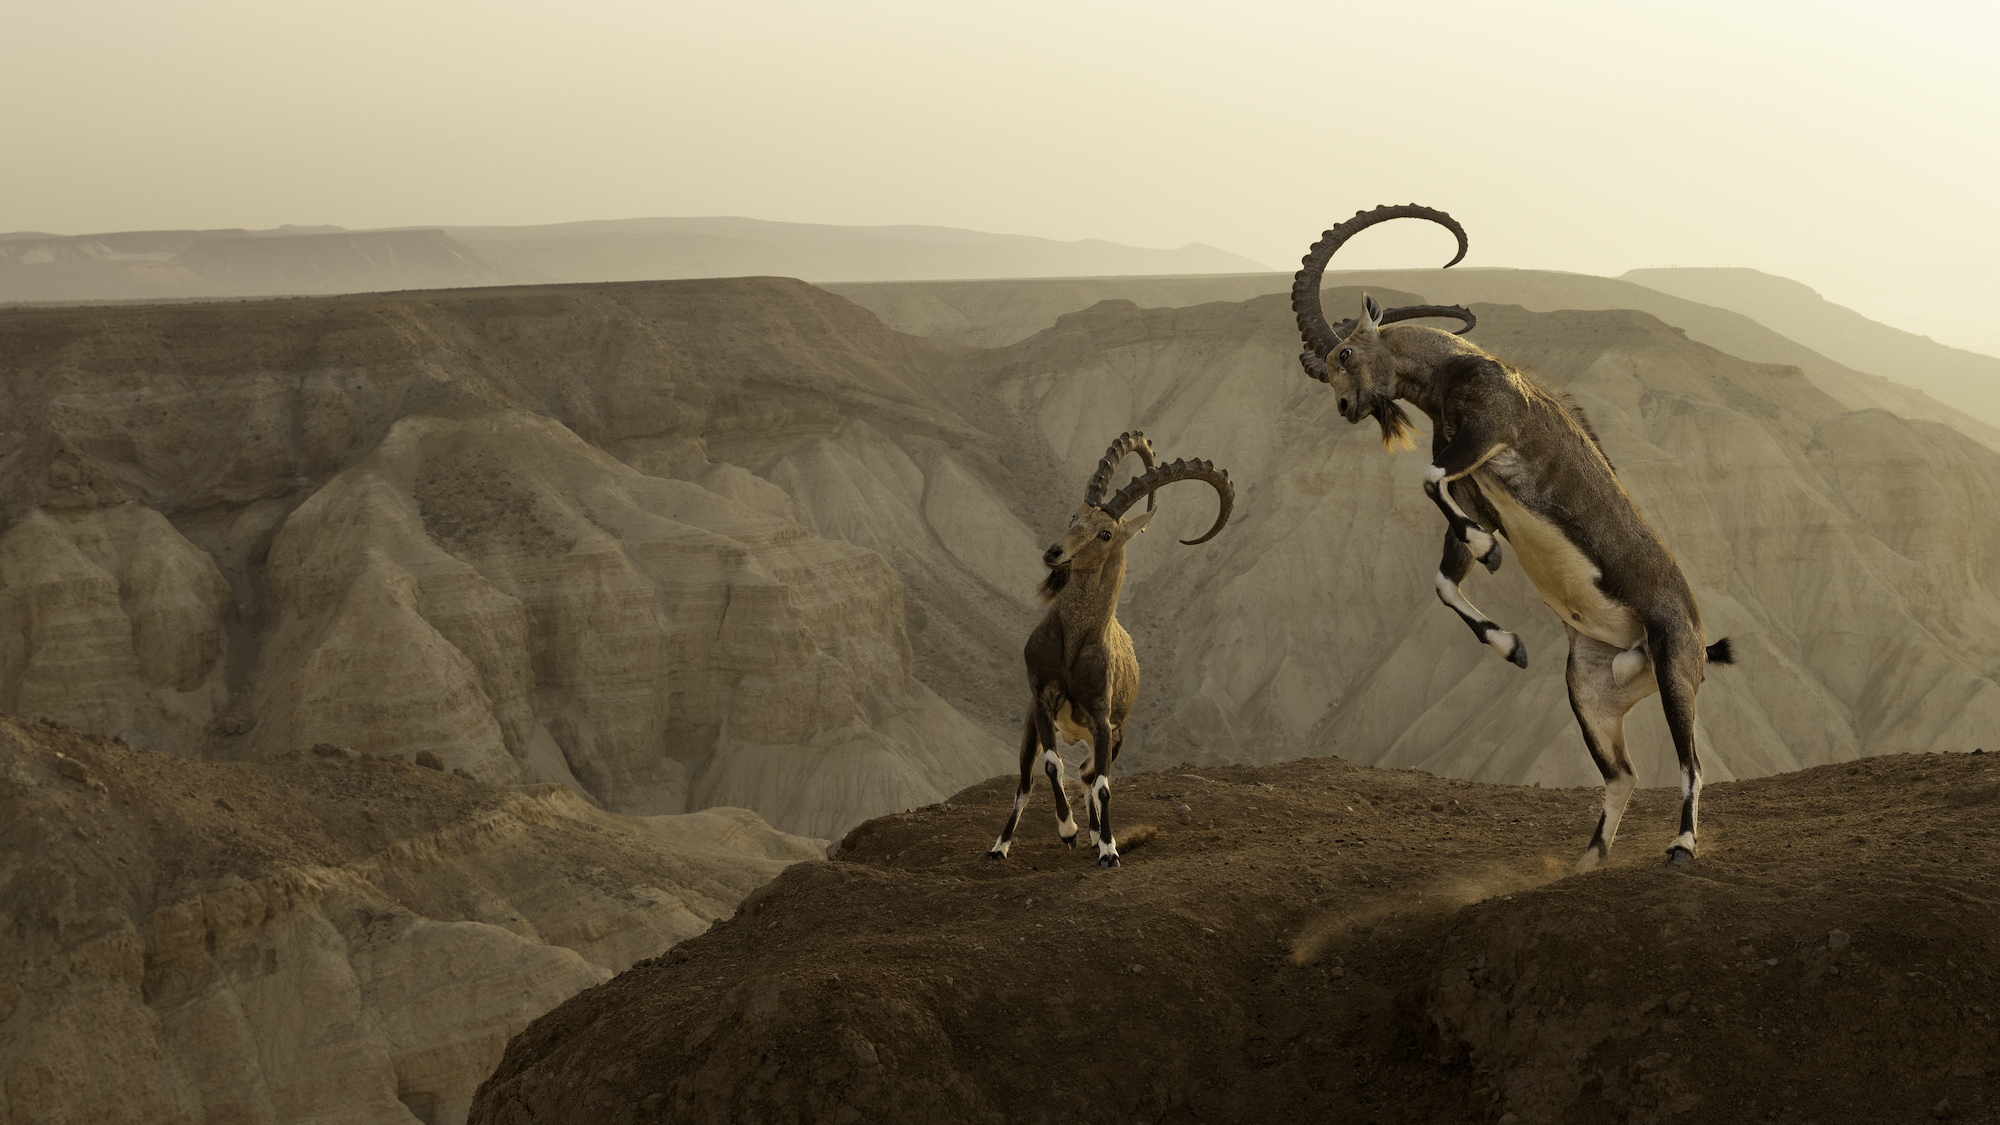 two horned goats jumping in the air on a desert plateau